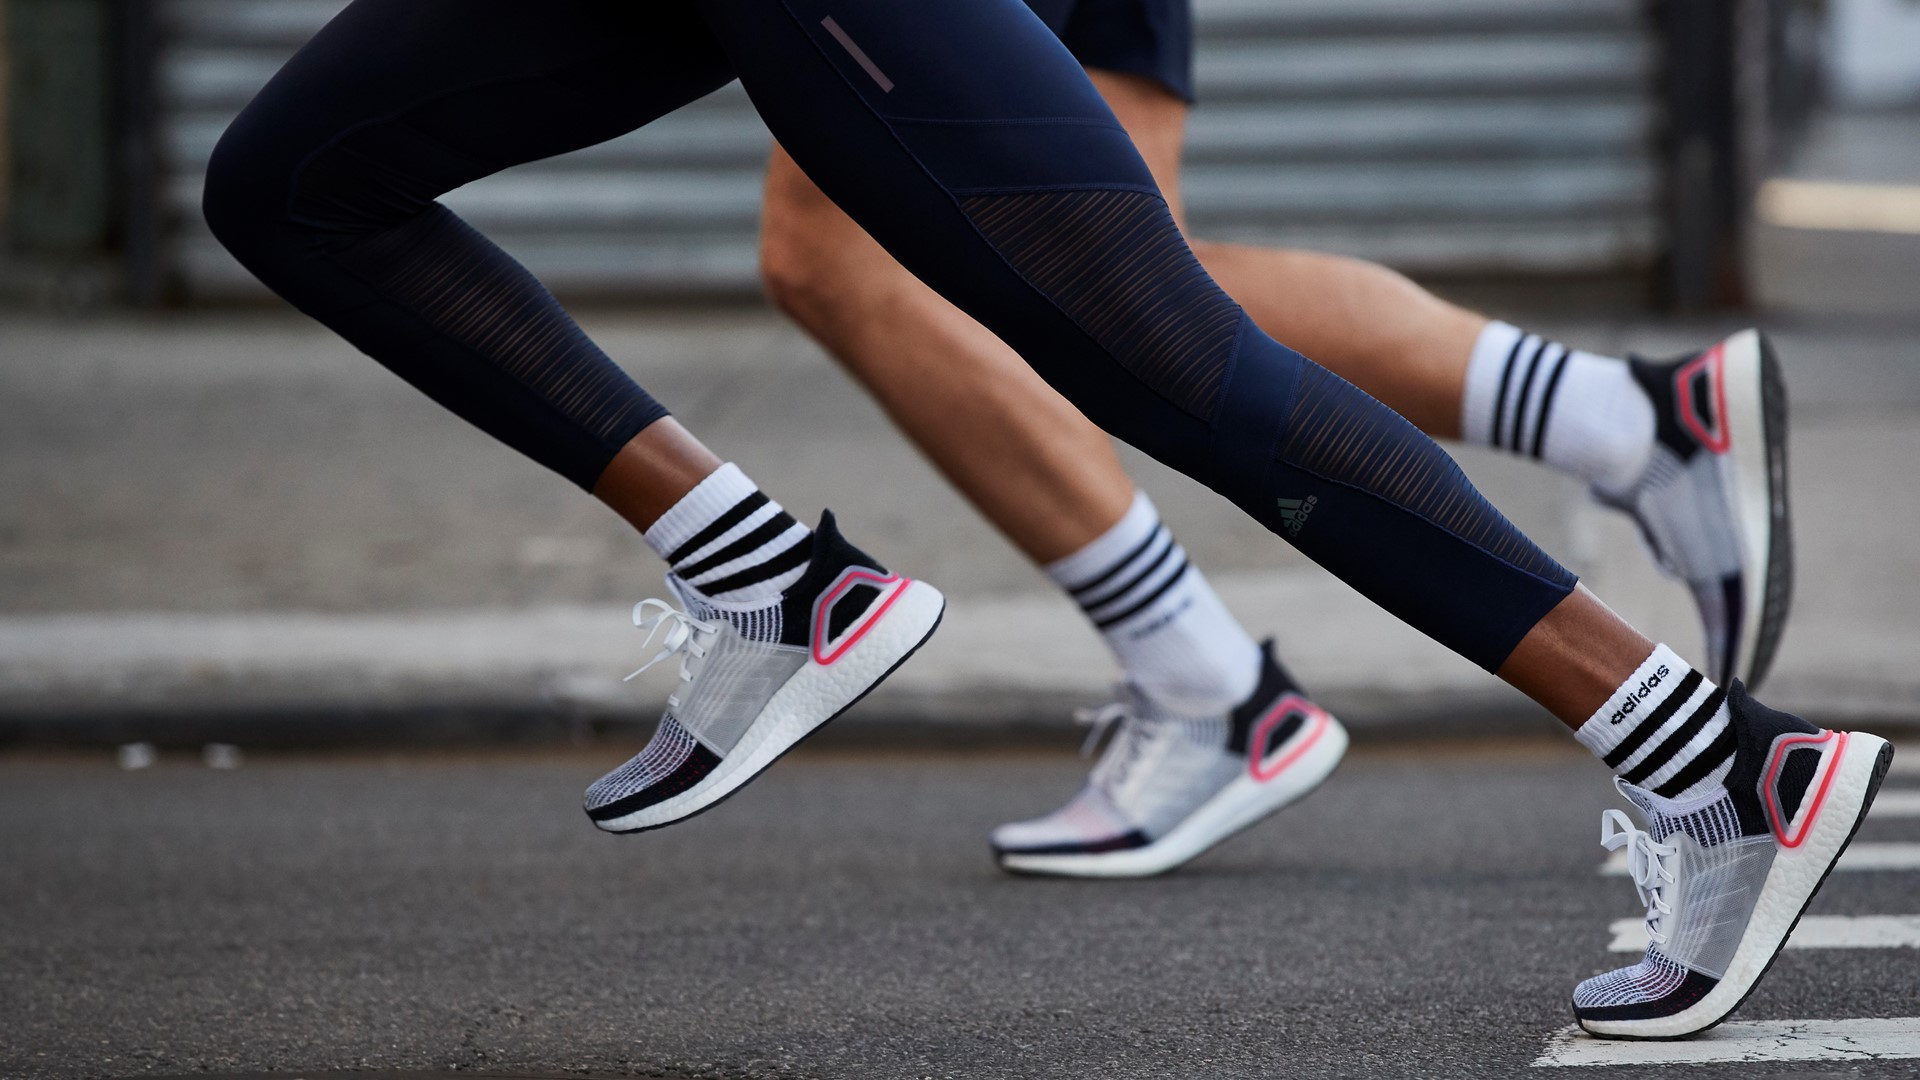 Laos Definitivo póngase en fila adidas works with thousands of runners to create the revolutionary adidas  Ultraboost 19 – a new shoe for a new sport